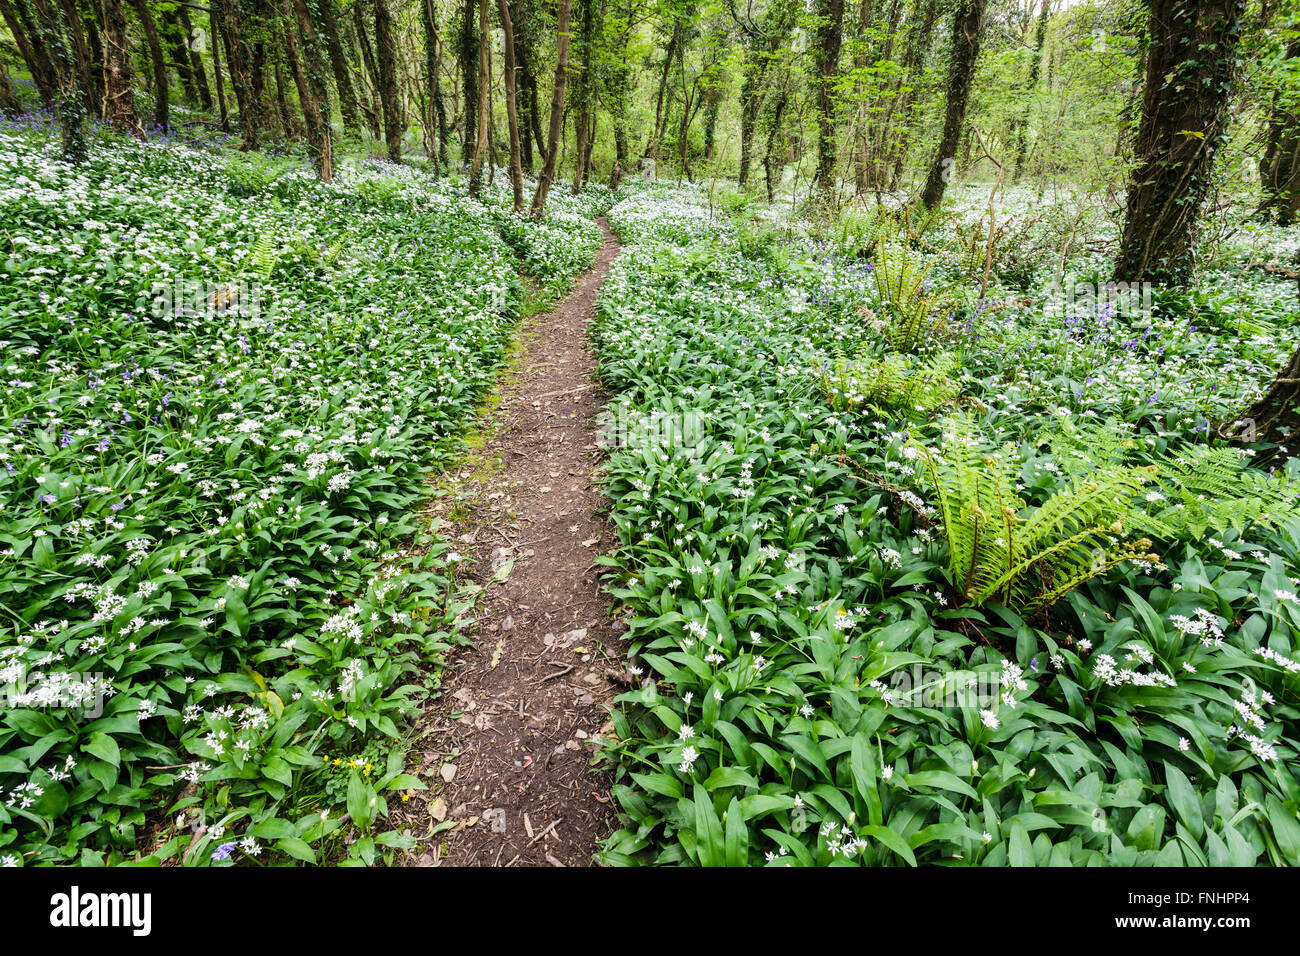 Broad-leaved Woodland in Springtime. Stock Photo